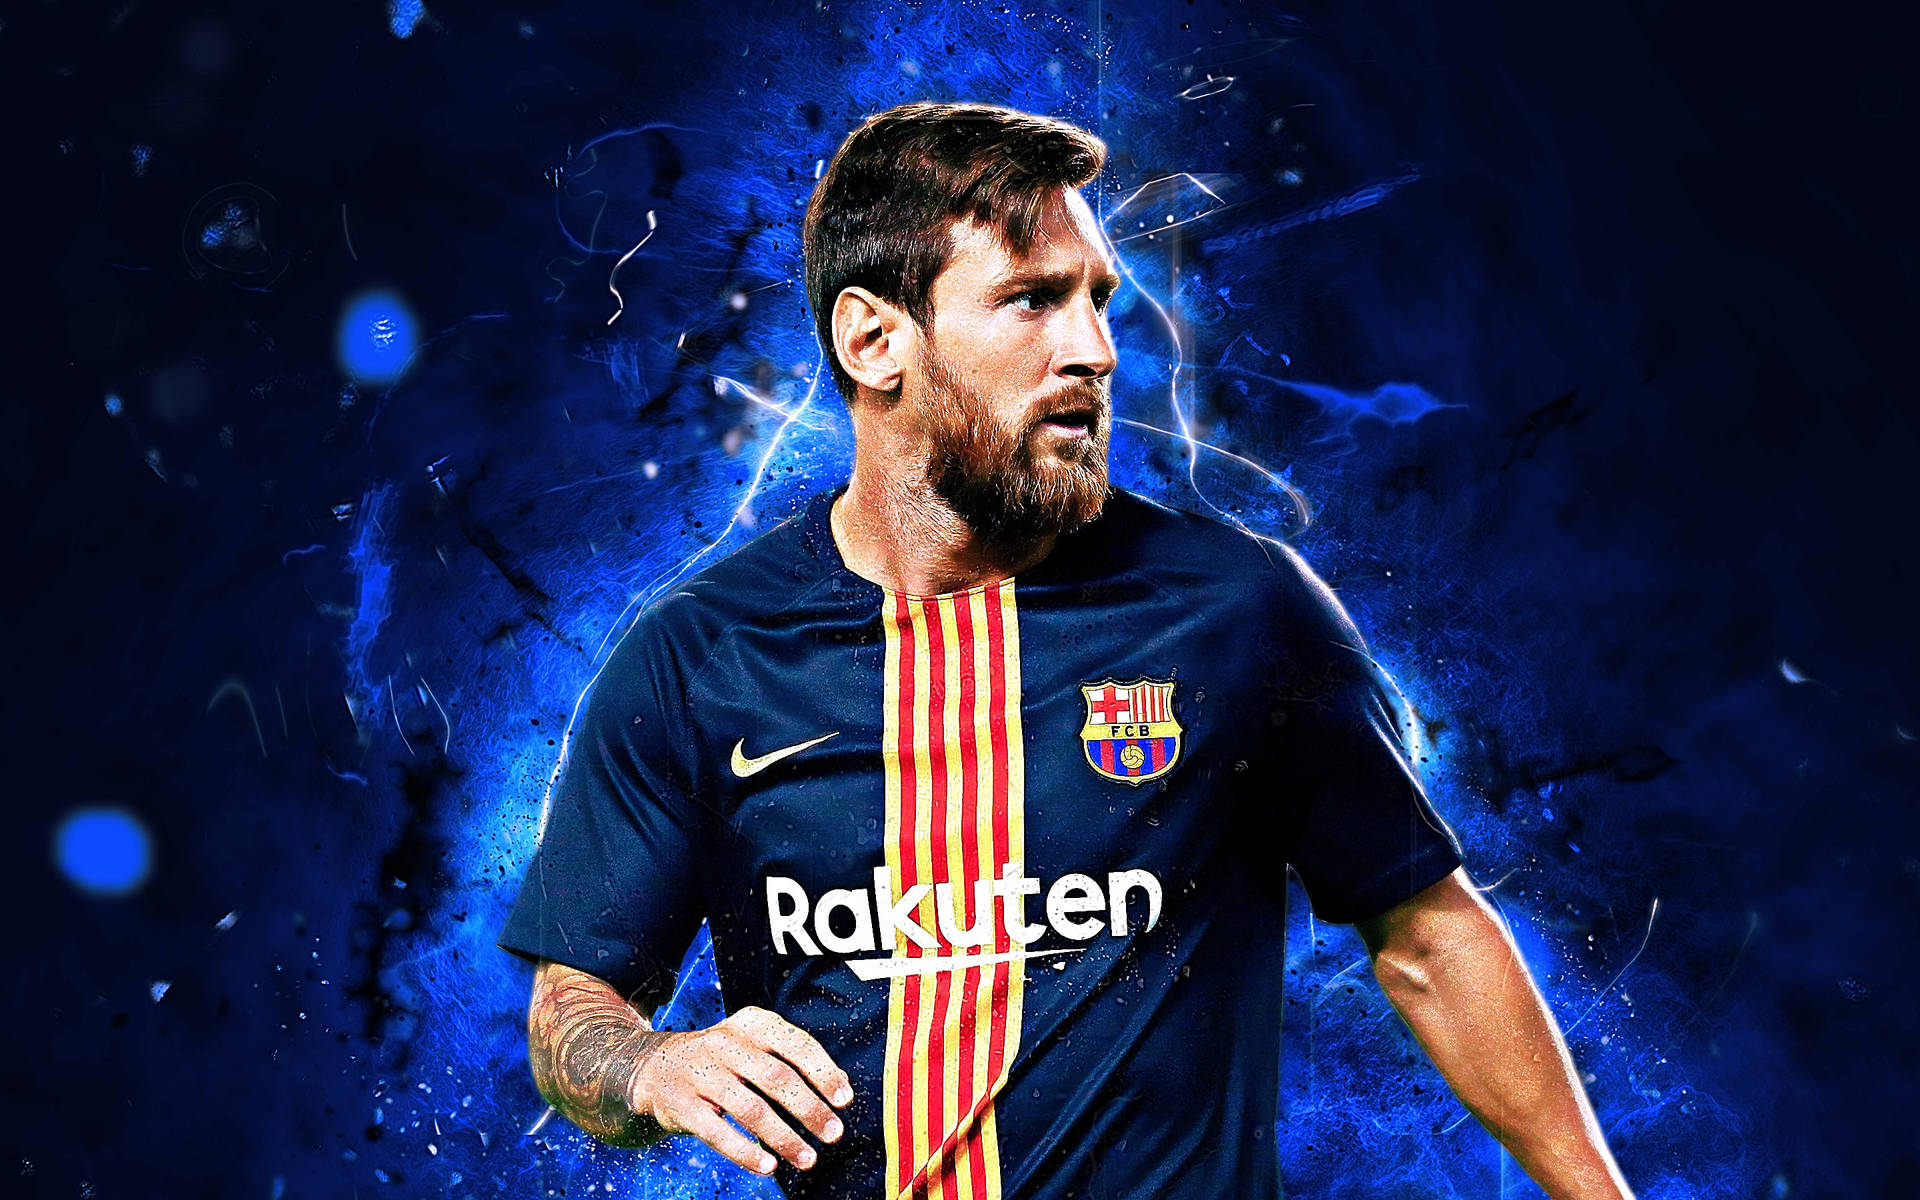 Lionel Messi 2020 Looking At Side Wallpaper